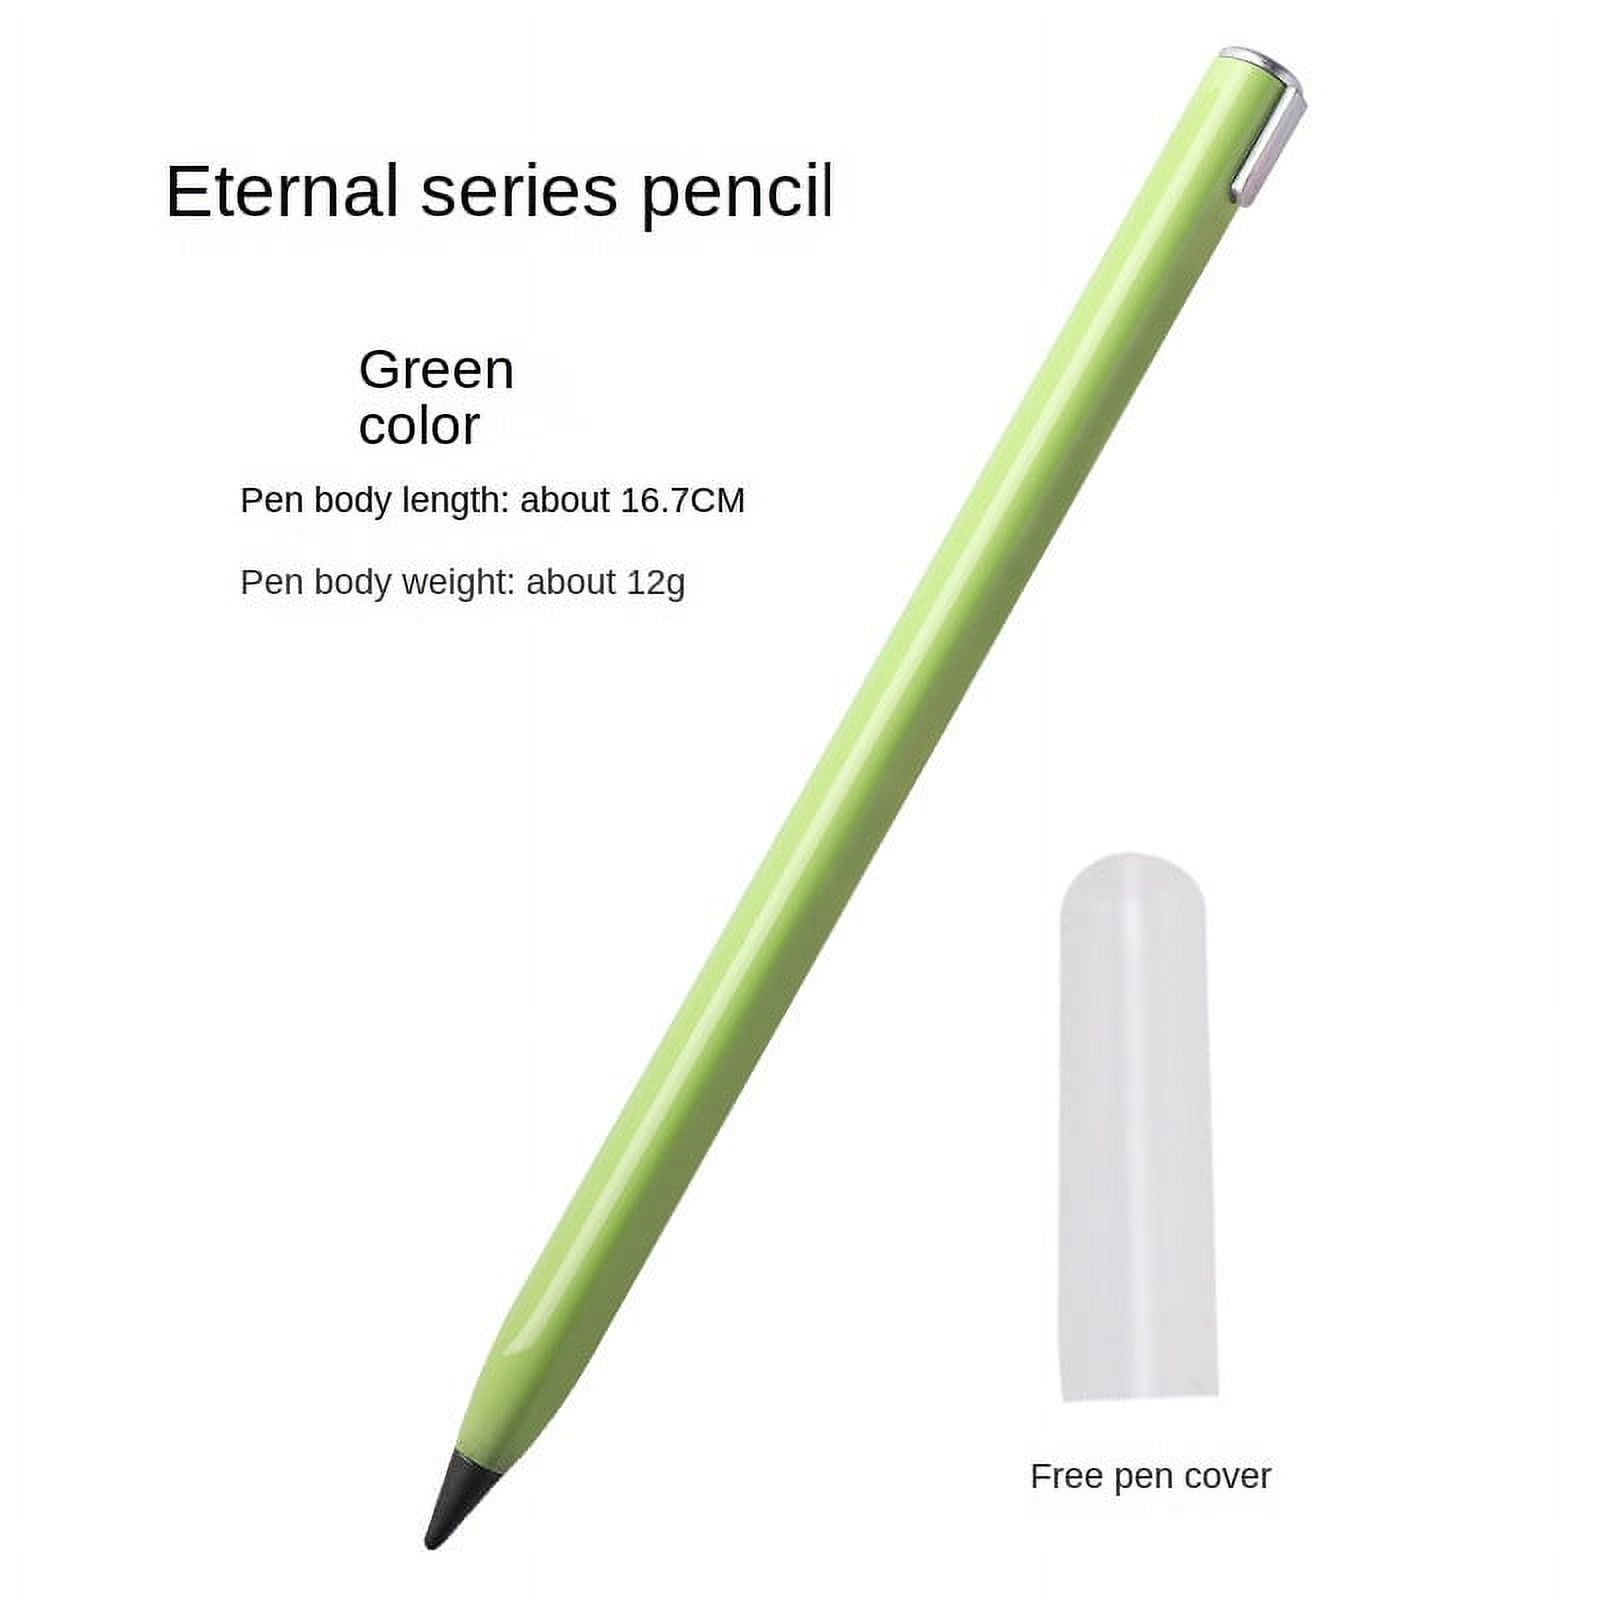 Inkless Pencils Eternal,Everlasting Magic Pencil with Eraser,Unlimited  Writing, Reusable Infinity Pencil, NO-Sharpening Pencils for Writing  Sketch,Cute Inkless Everlasting Pencil for Kids Writing 